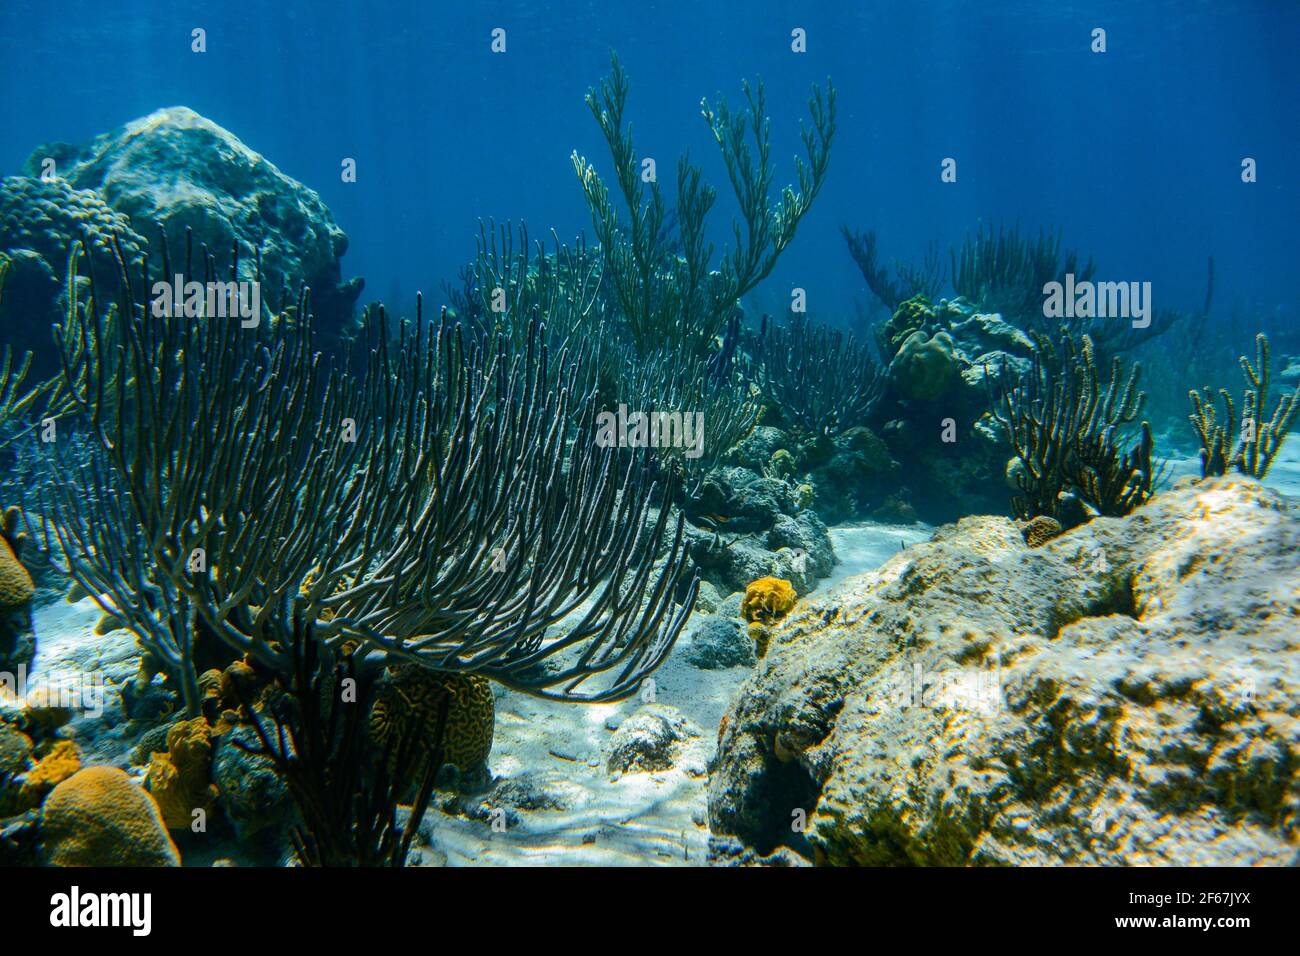 Natural light coral reef scenery Stock Photo